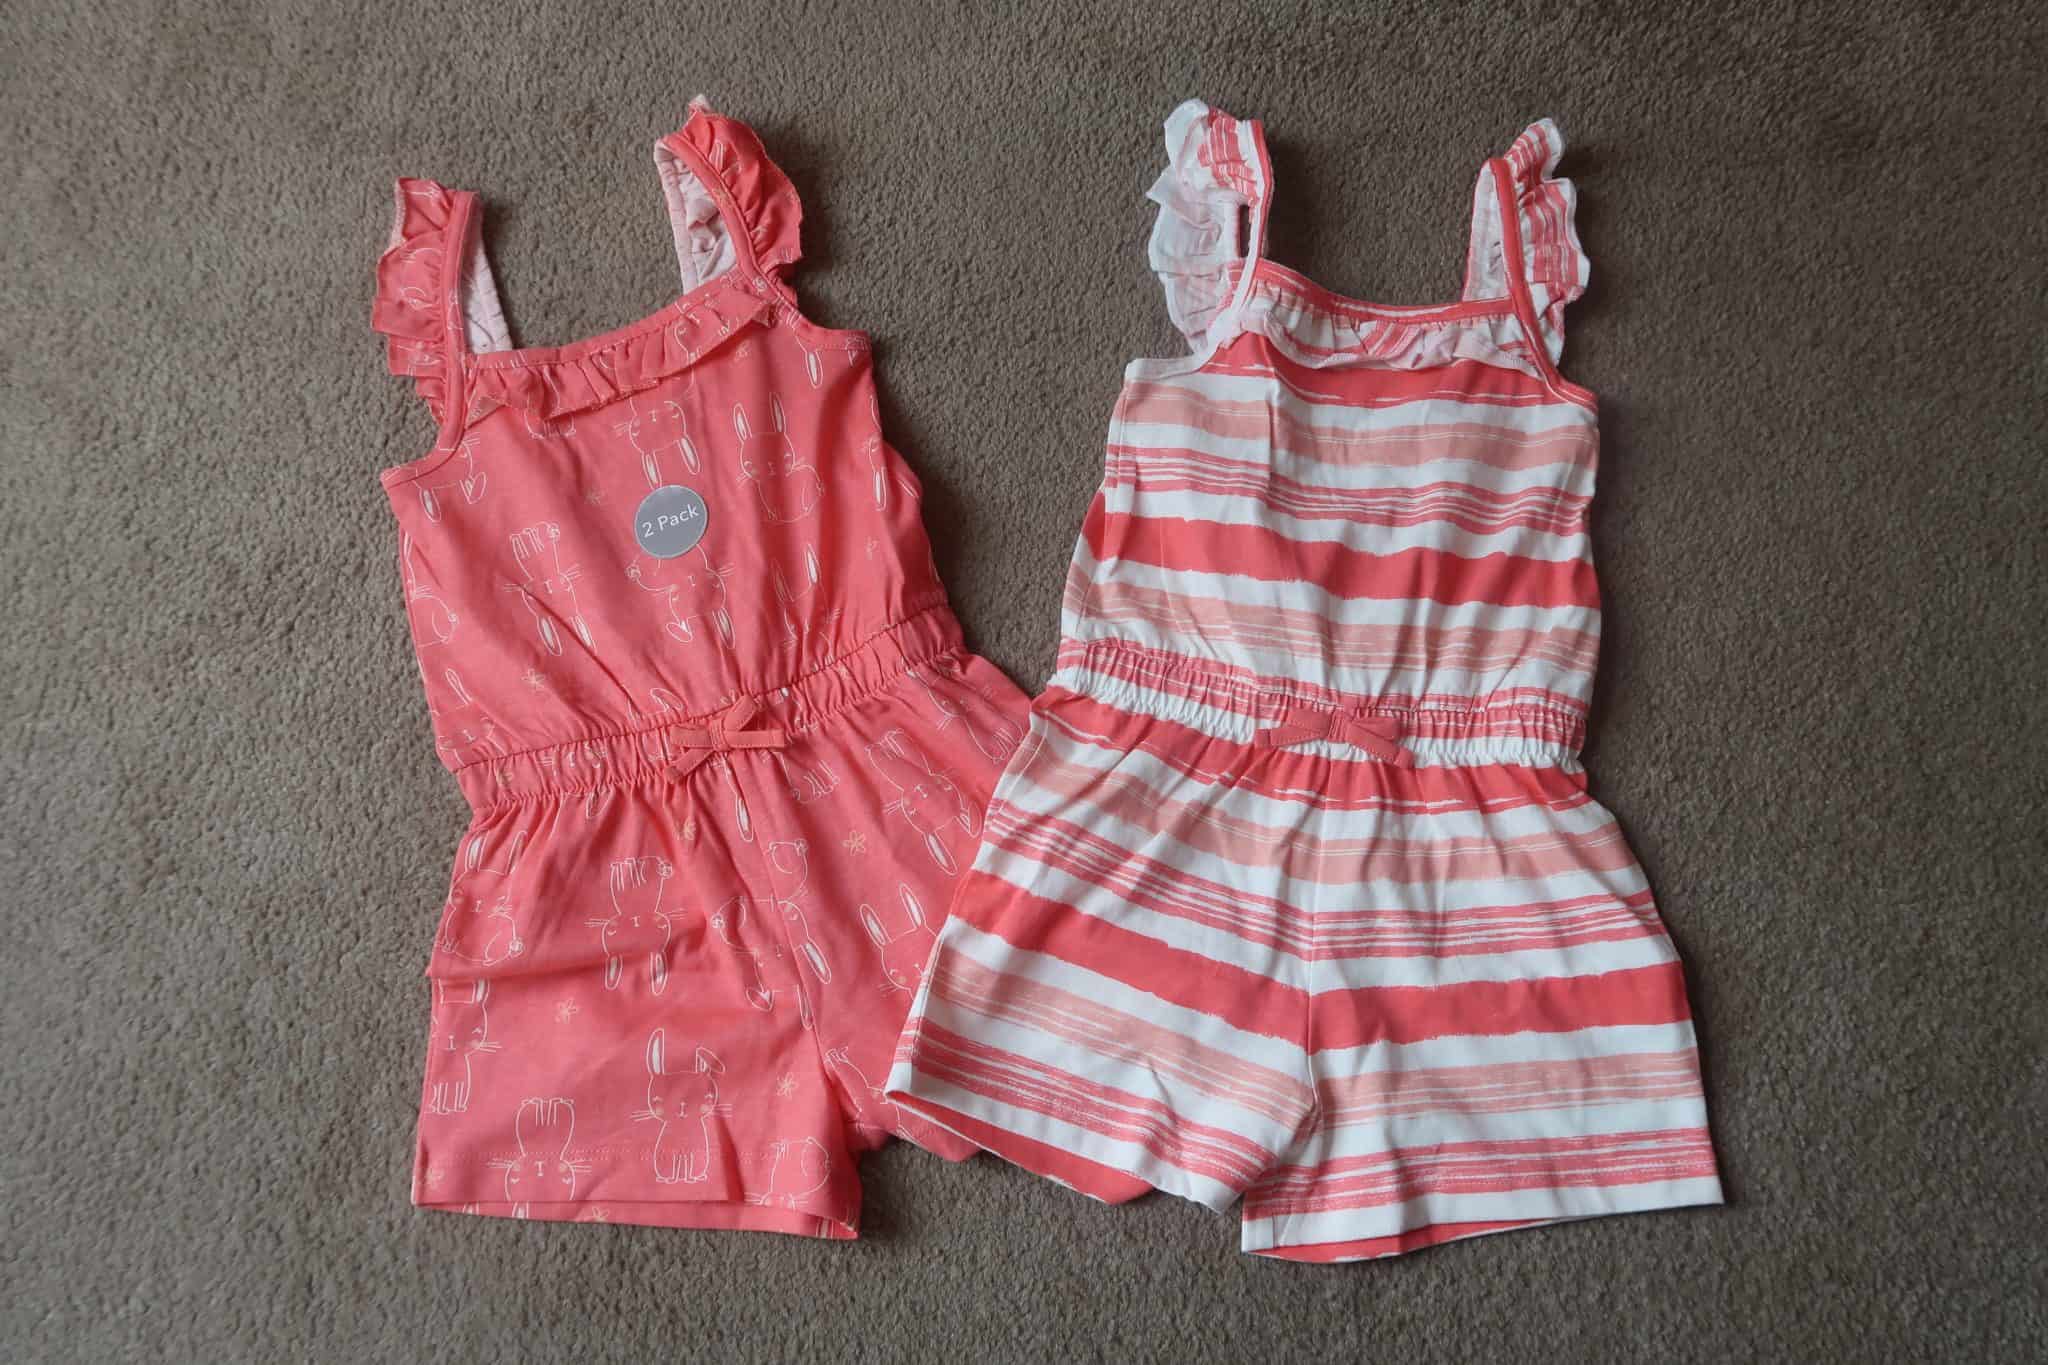 Toddler Summer Clothes Haul From George - Me, him, the dog and a baby!